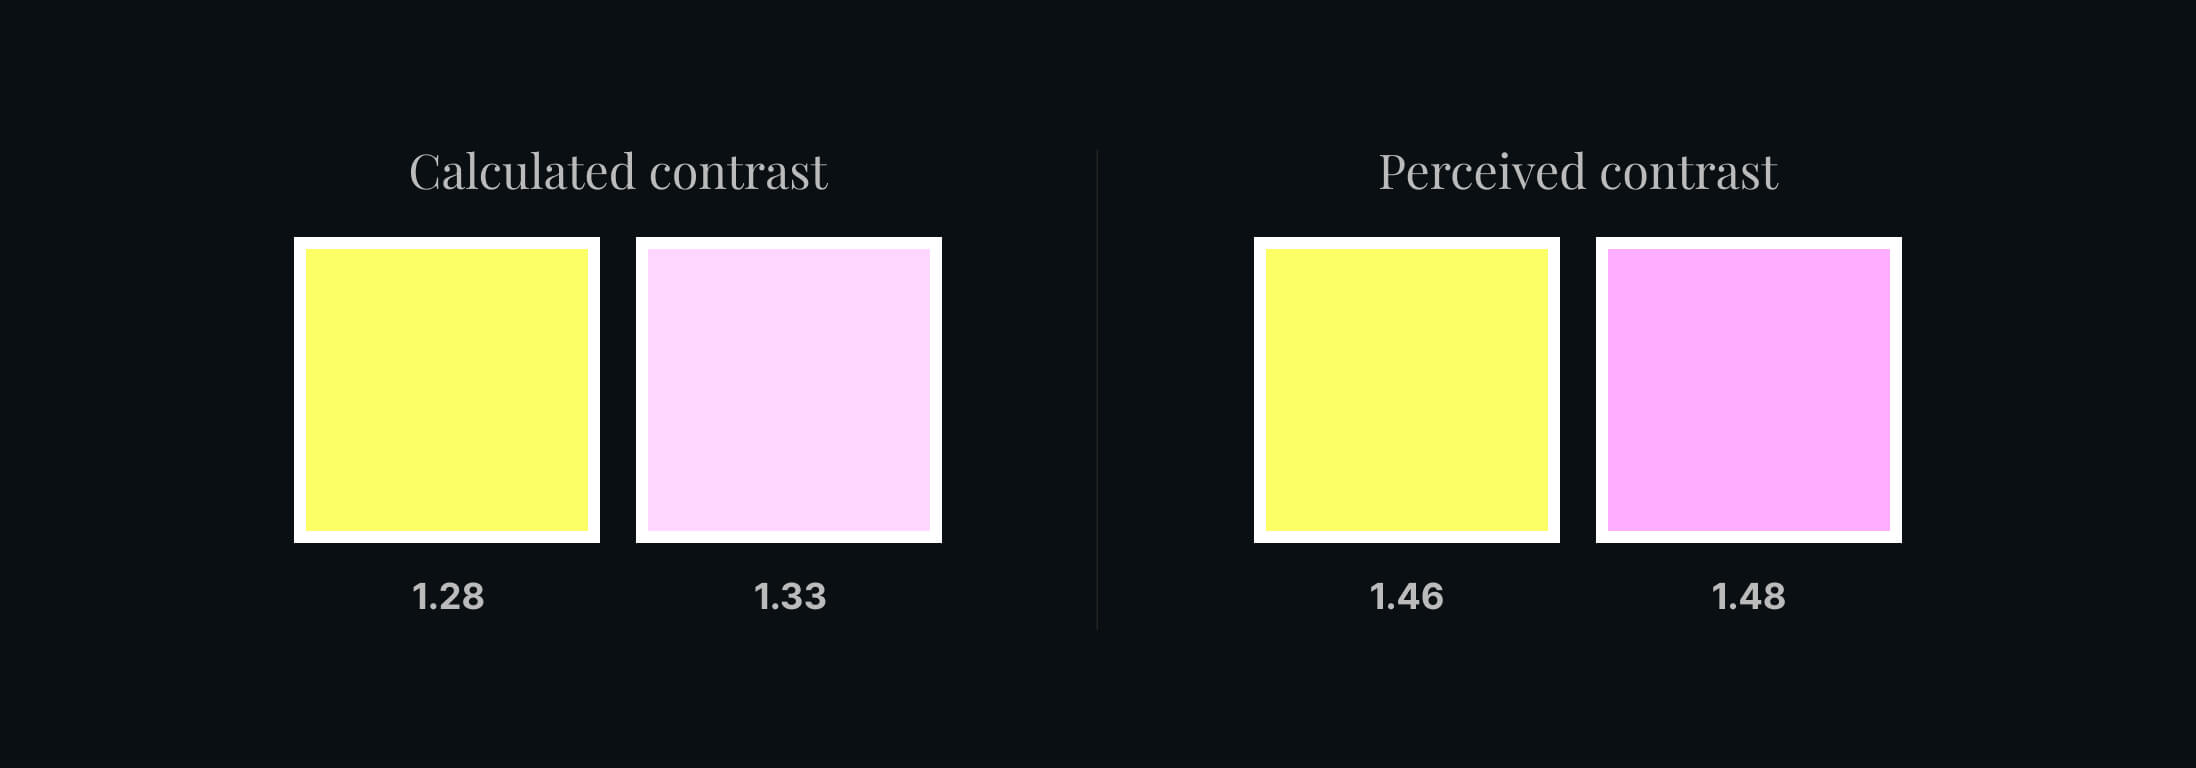 Perceived and Calculated contrast display